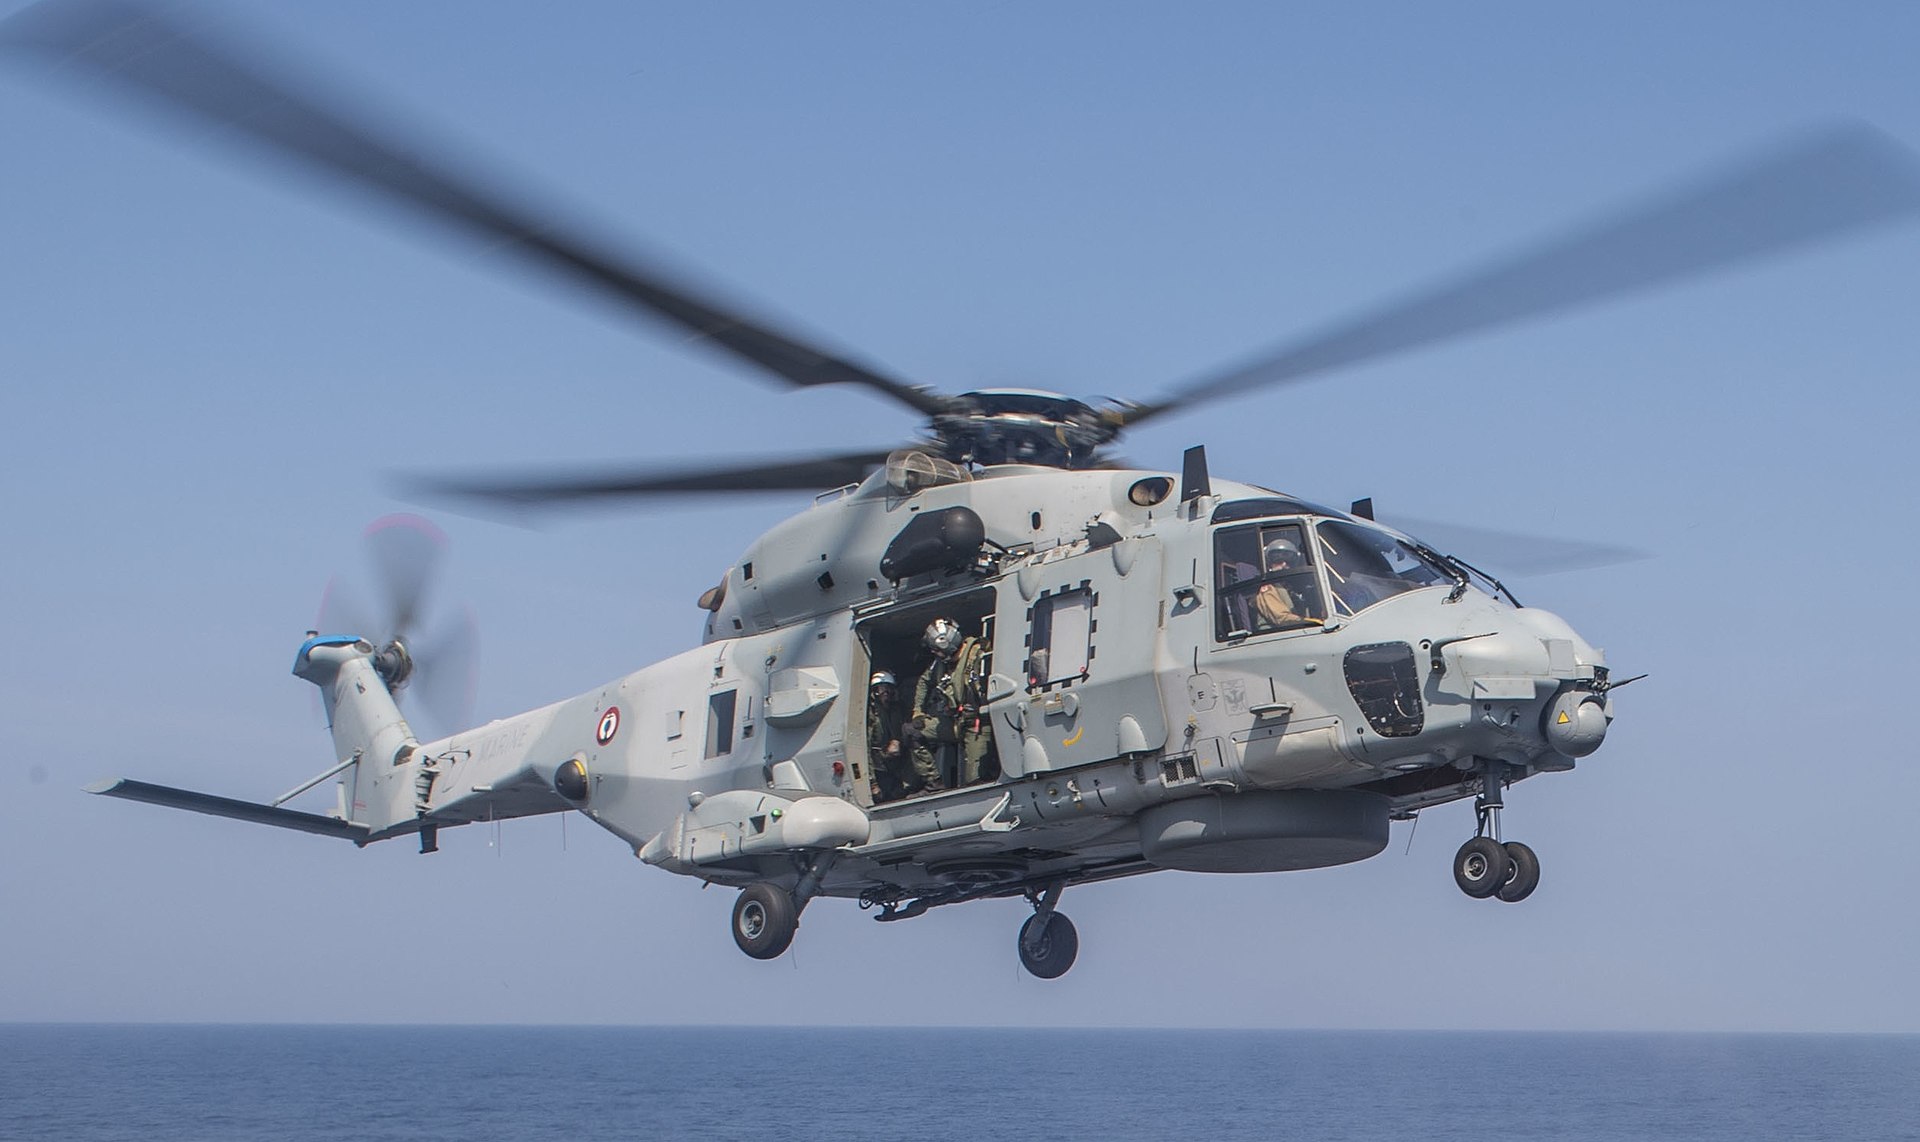 French_Navy_NH90_lands_on_USS_Antietam_(CG-54)_in_the_Bay_of_Bengal_(cropped).jpg